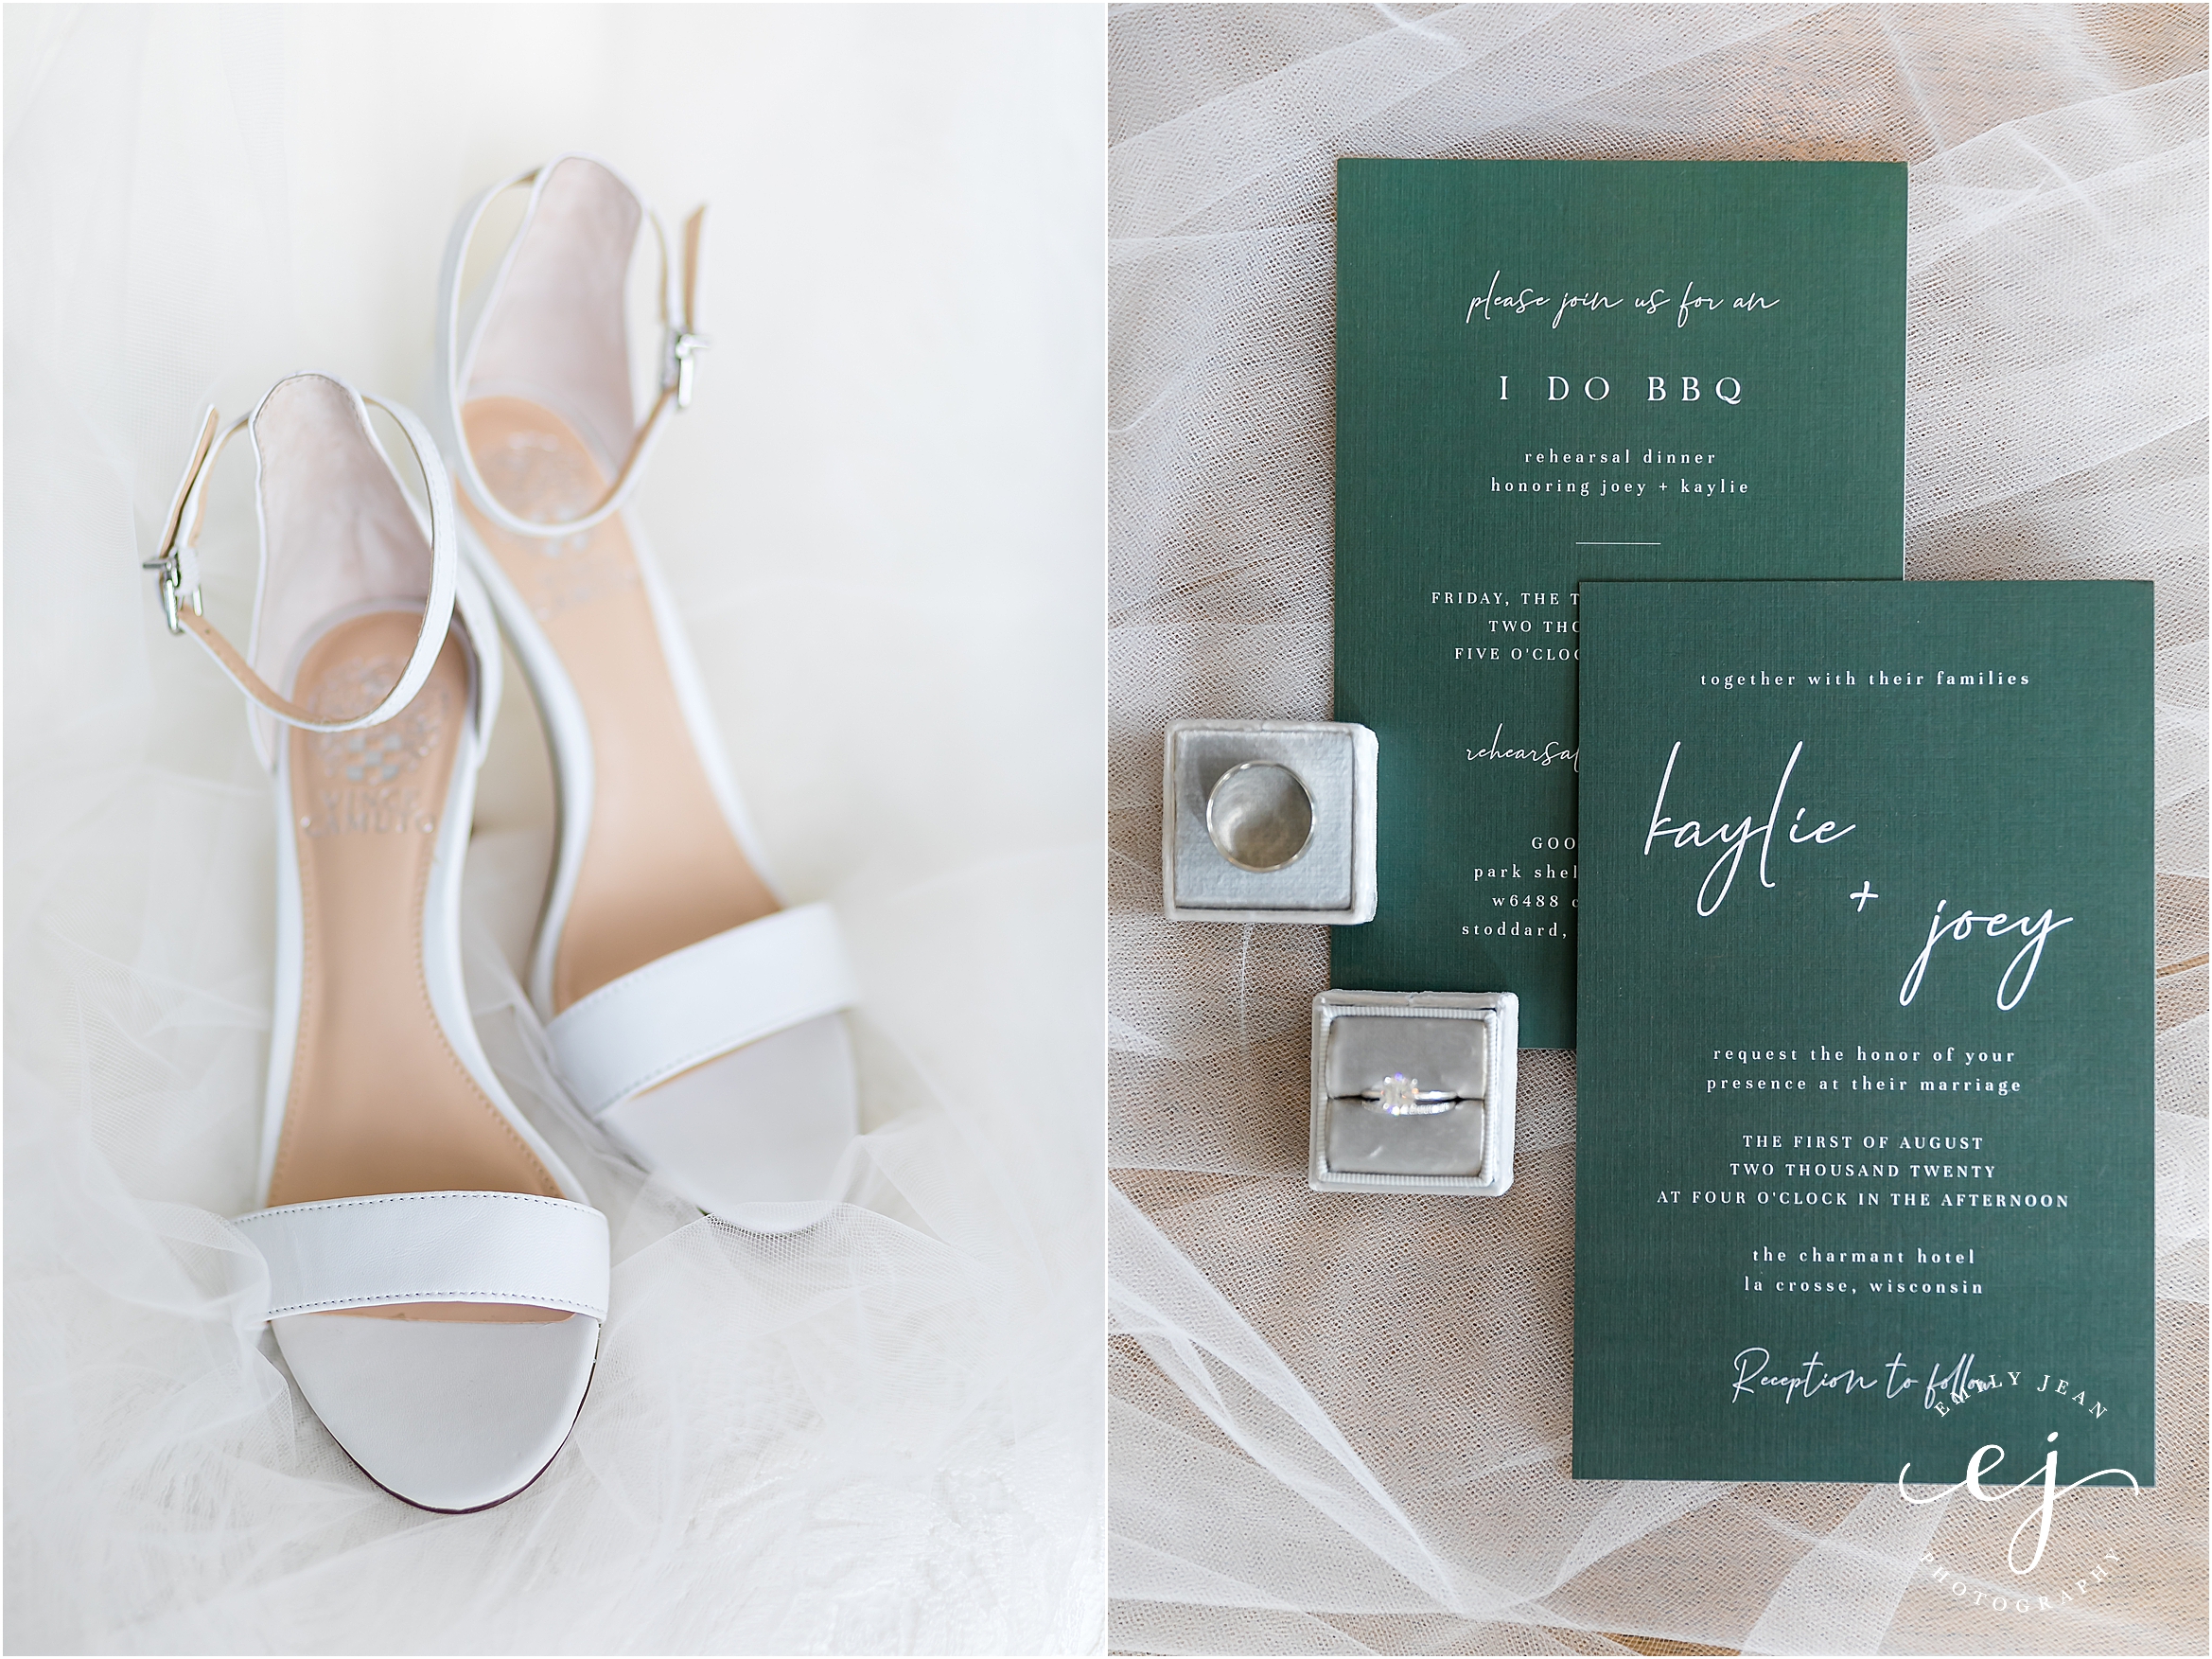 the charmant hotel wedding white shoes and green invitation